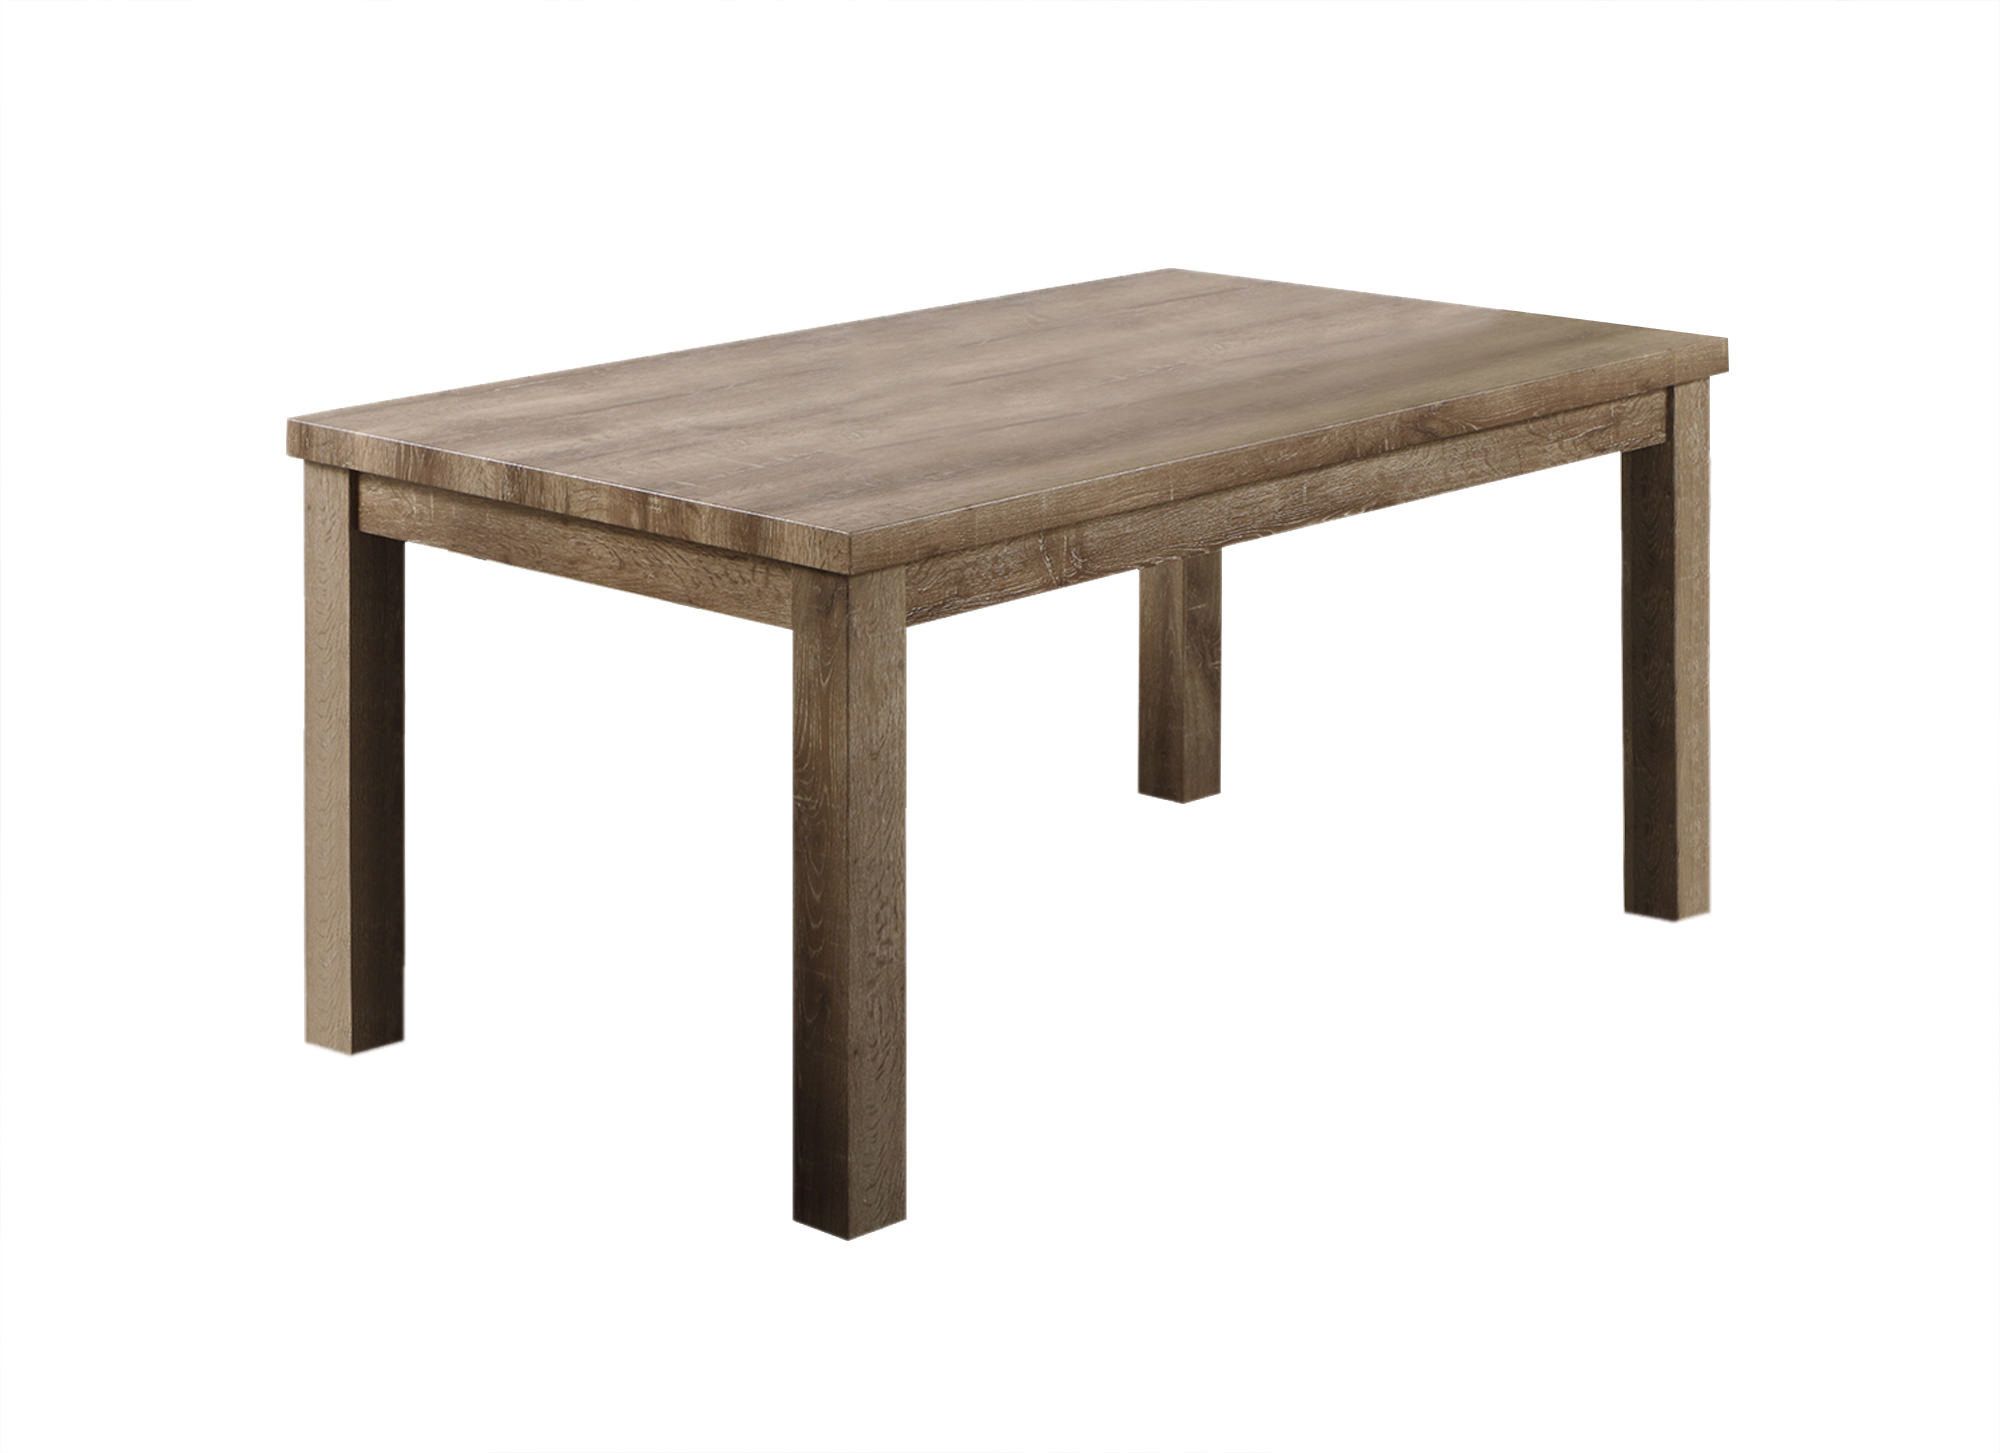 Latest Millwood Pines Ephraim Dining Table & Reviews (View 7 of 20)